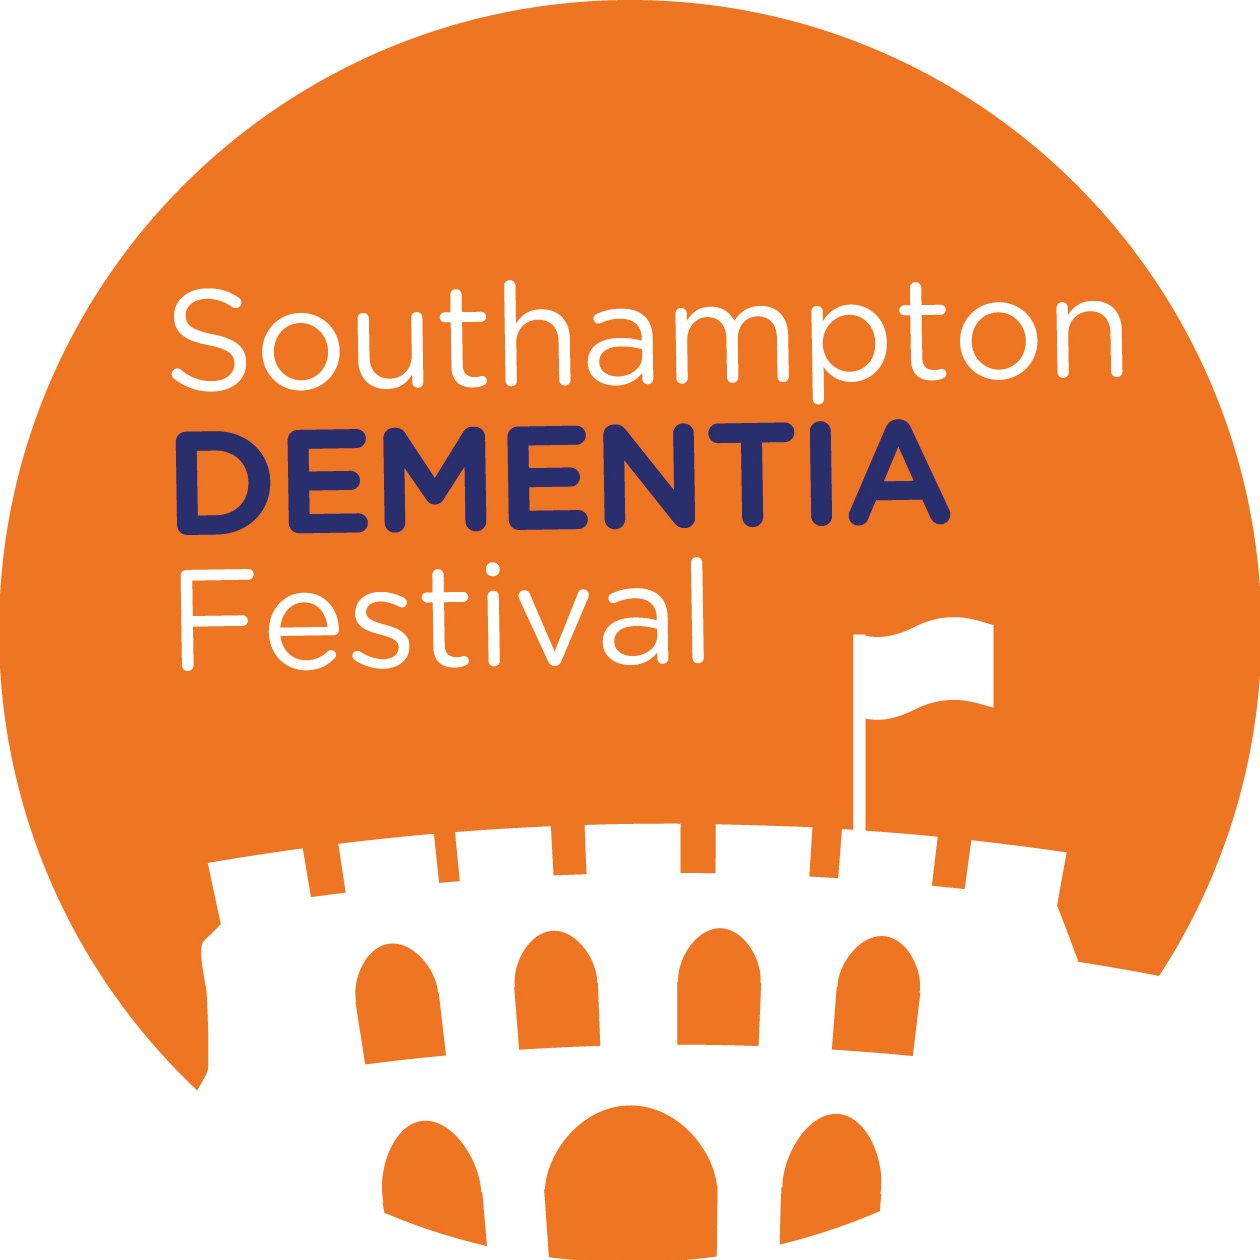 Welcome to Southampton Dementia Festival 2021
Wellbeing in Nature.